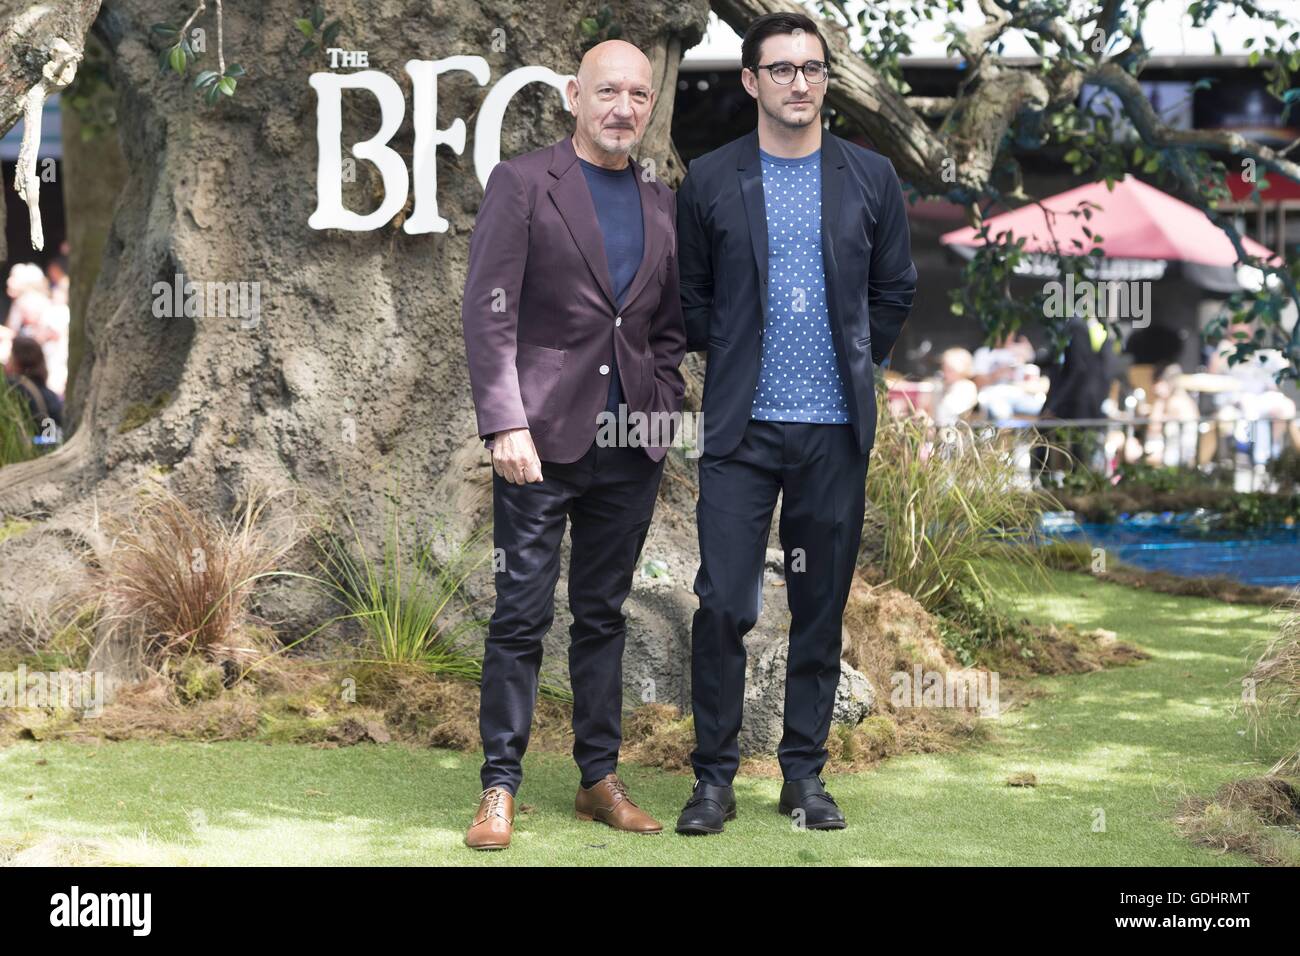 London, United Kingdom Of Great Britain And Northern Ireland. 17th July, 2016. Sir Ben Kingsley and Ferdinand Kingsley, The BFG film premiere at Leicester Square in London. 17/07/2016 | usage worldwide/picture alliance Credit:  dpa/Alamy Live News Stock Photo